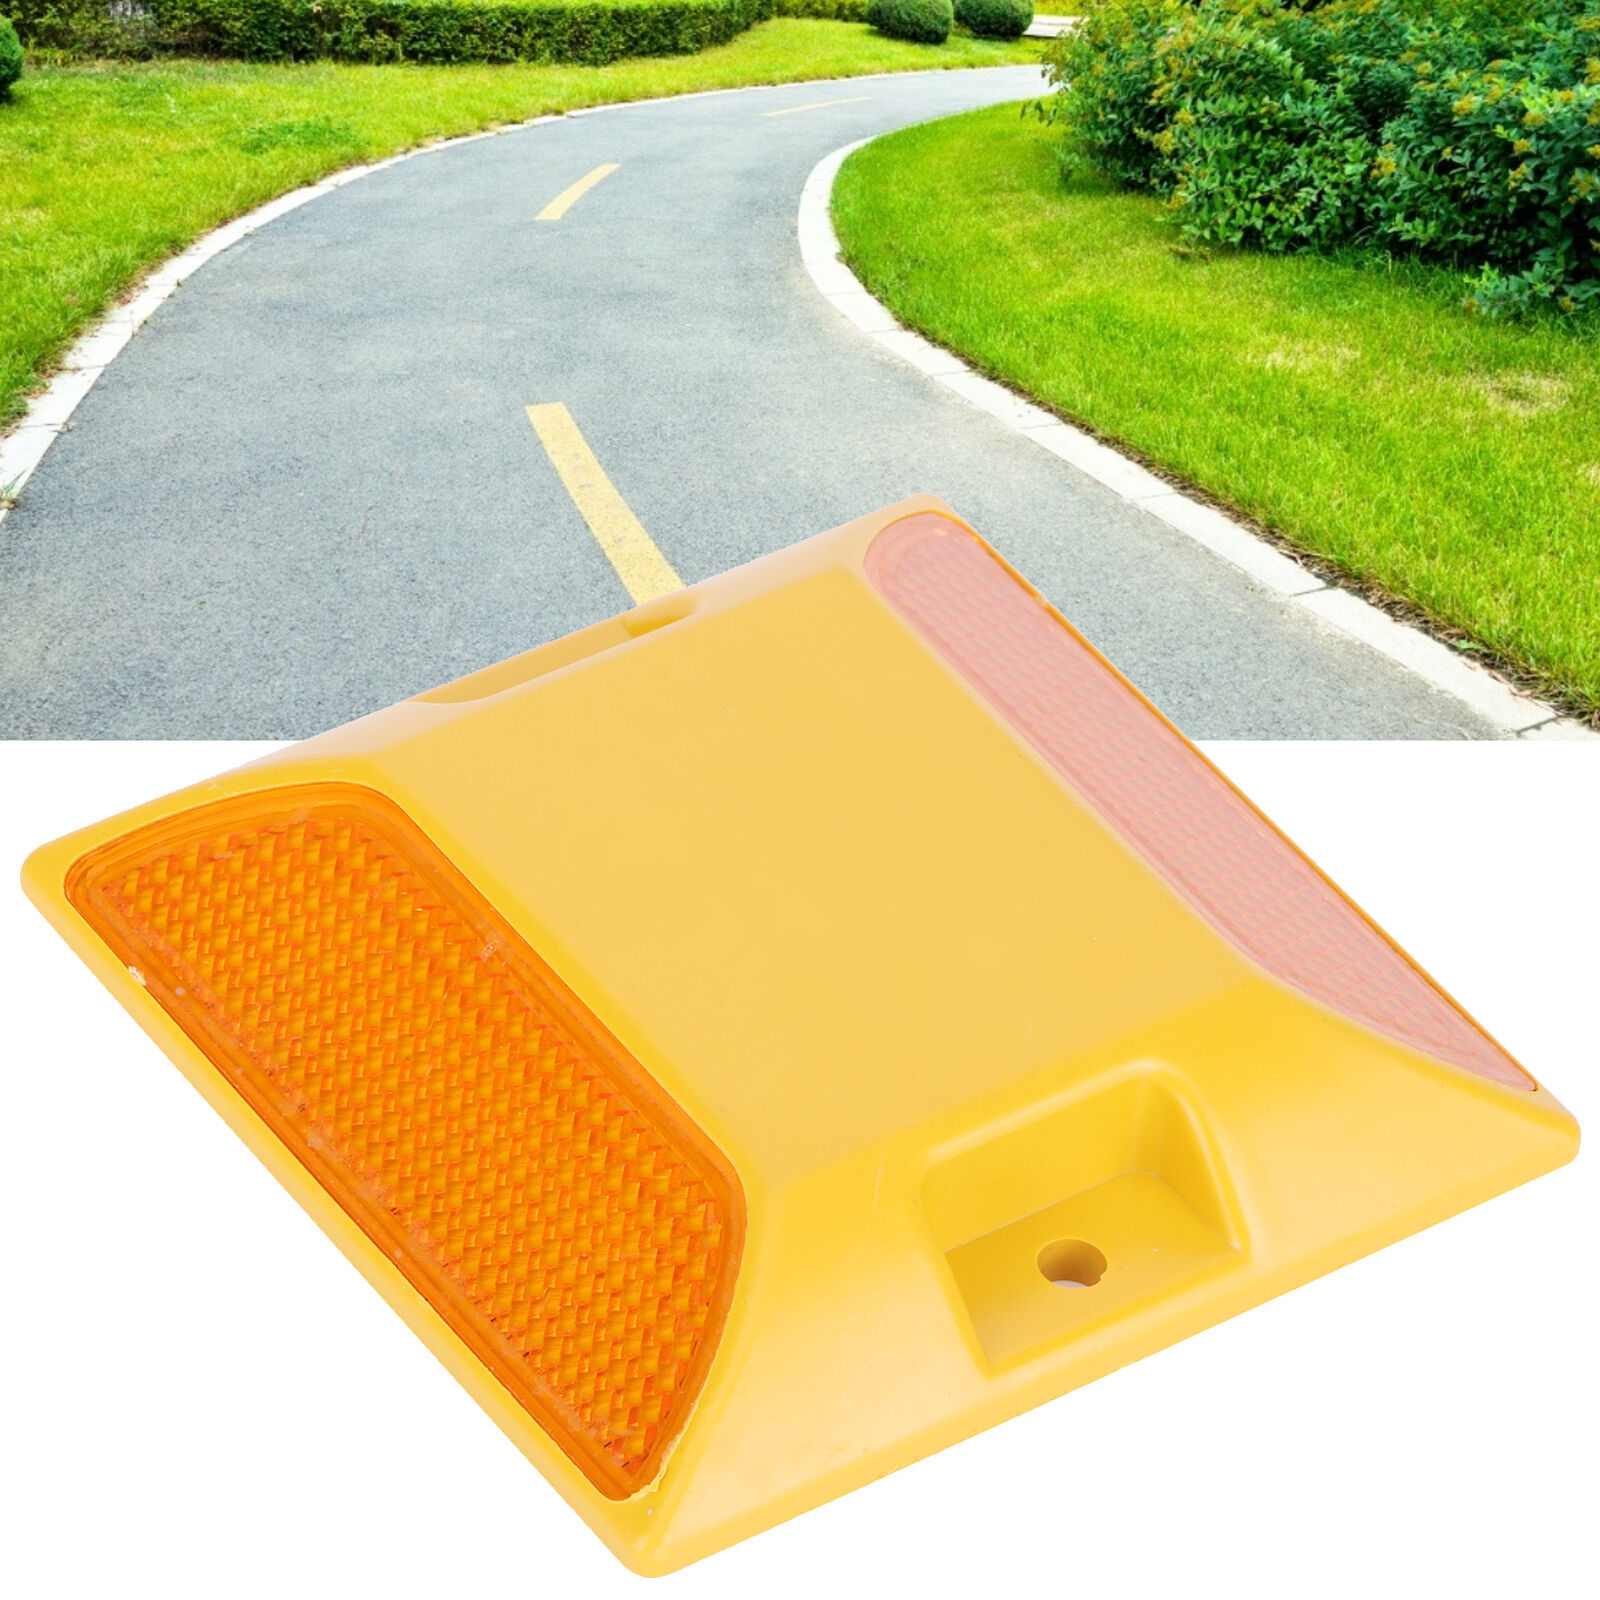 6PCS Double Yellow Plastic Road Reflectors For Driveway Safety